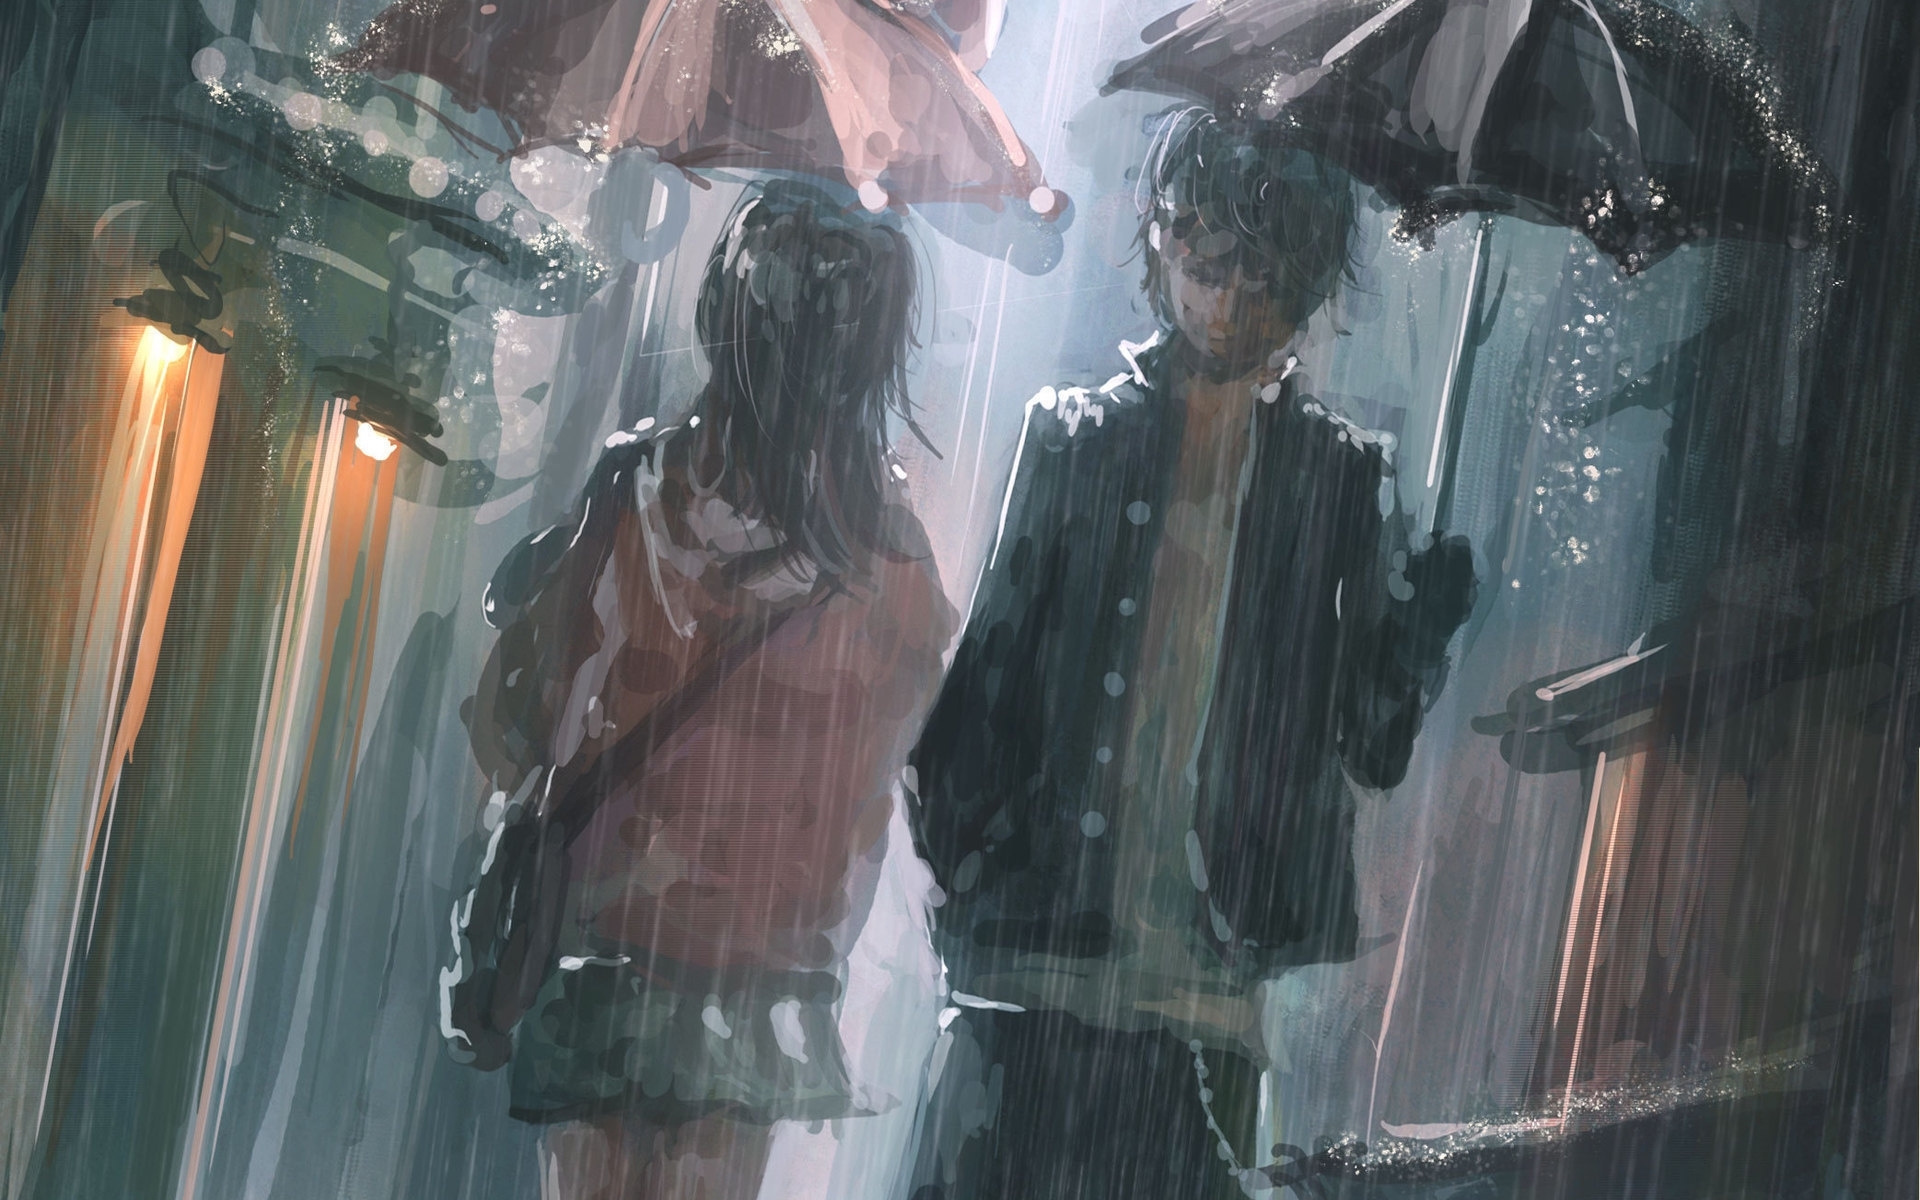 New Lock Screen Wallpapers pictures, people, rain